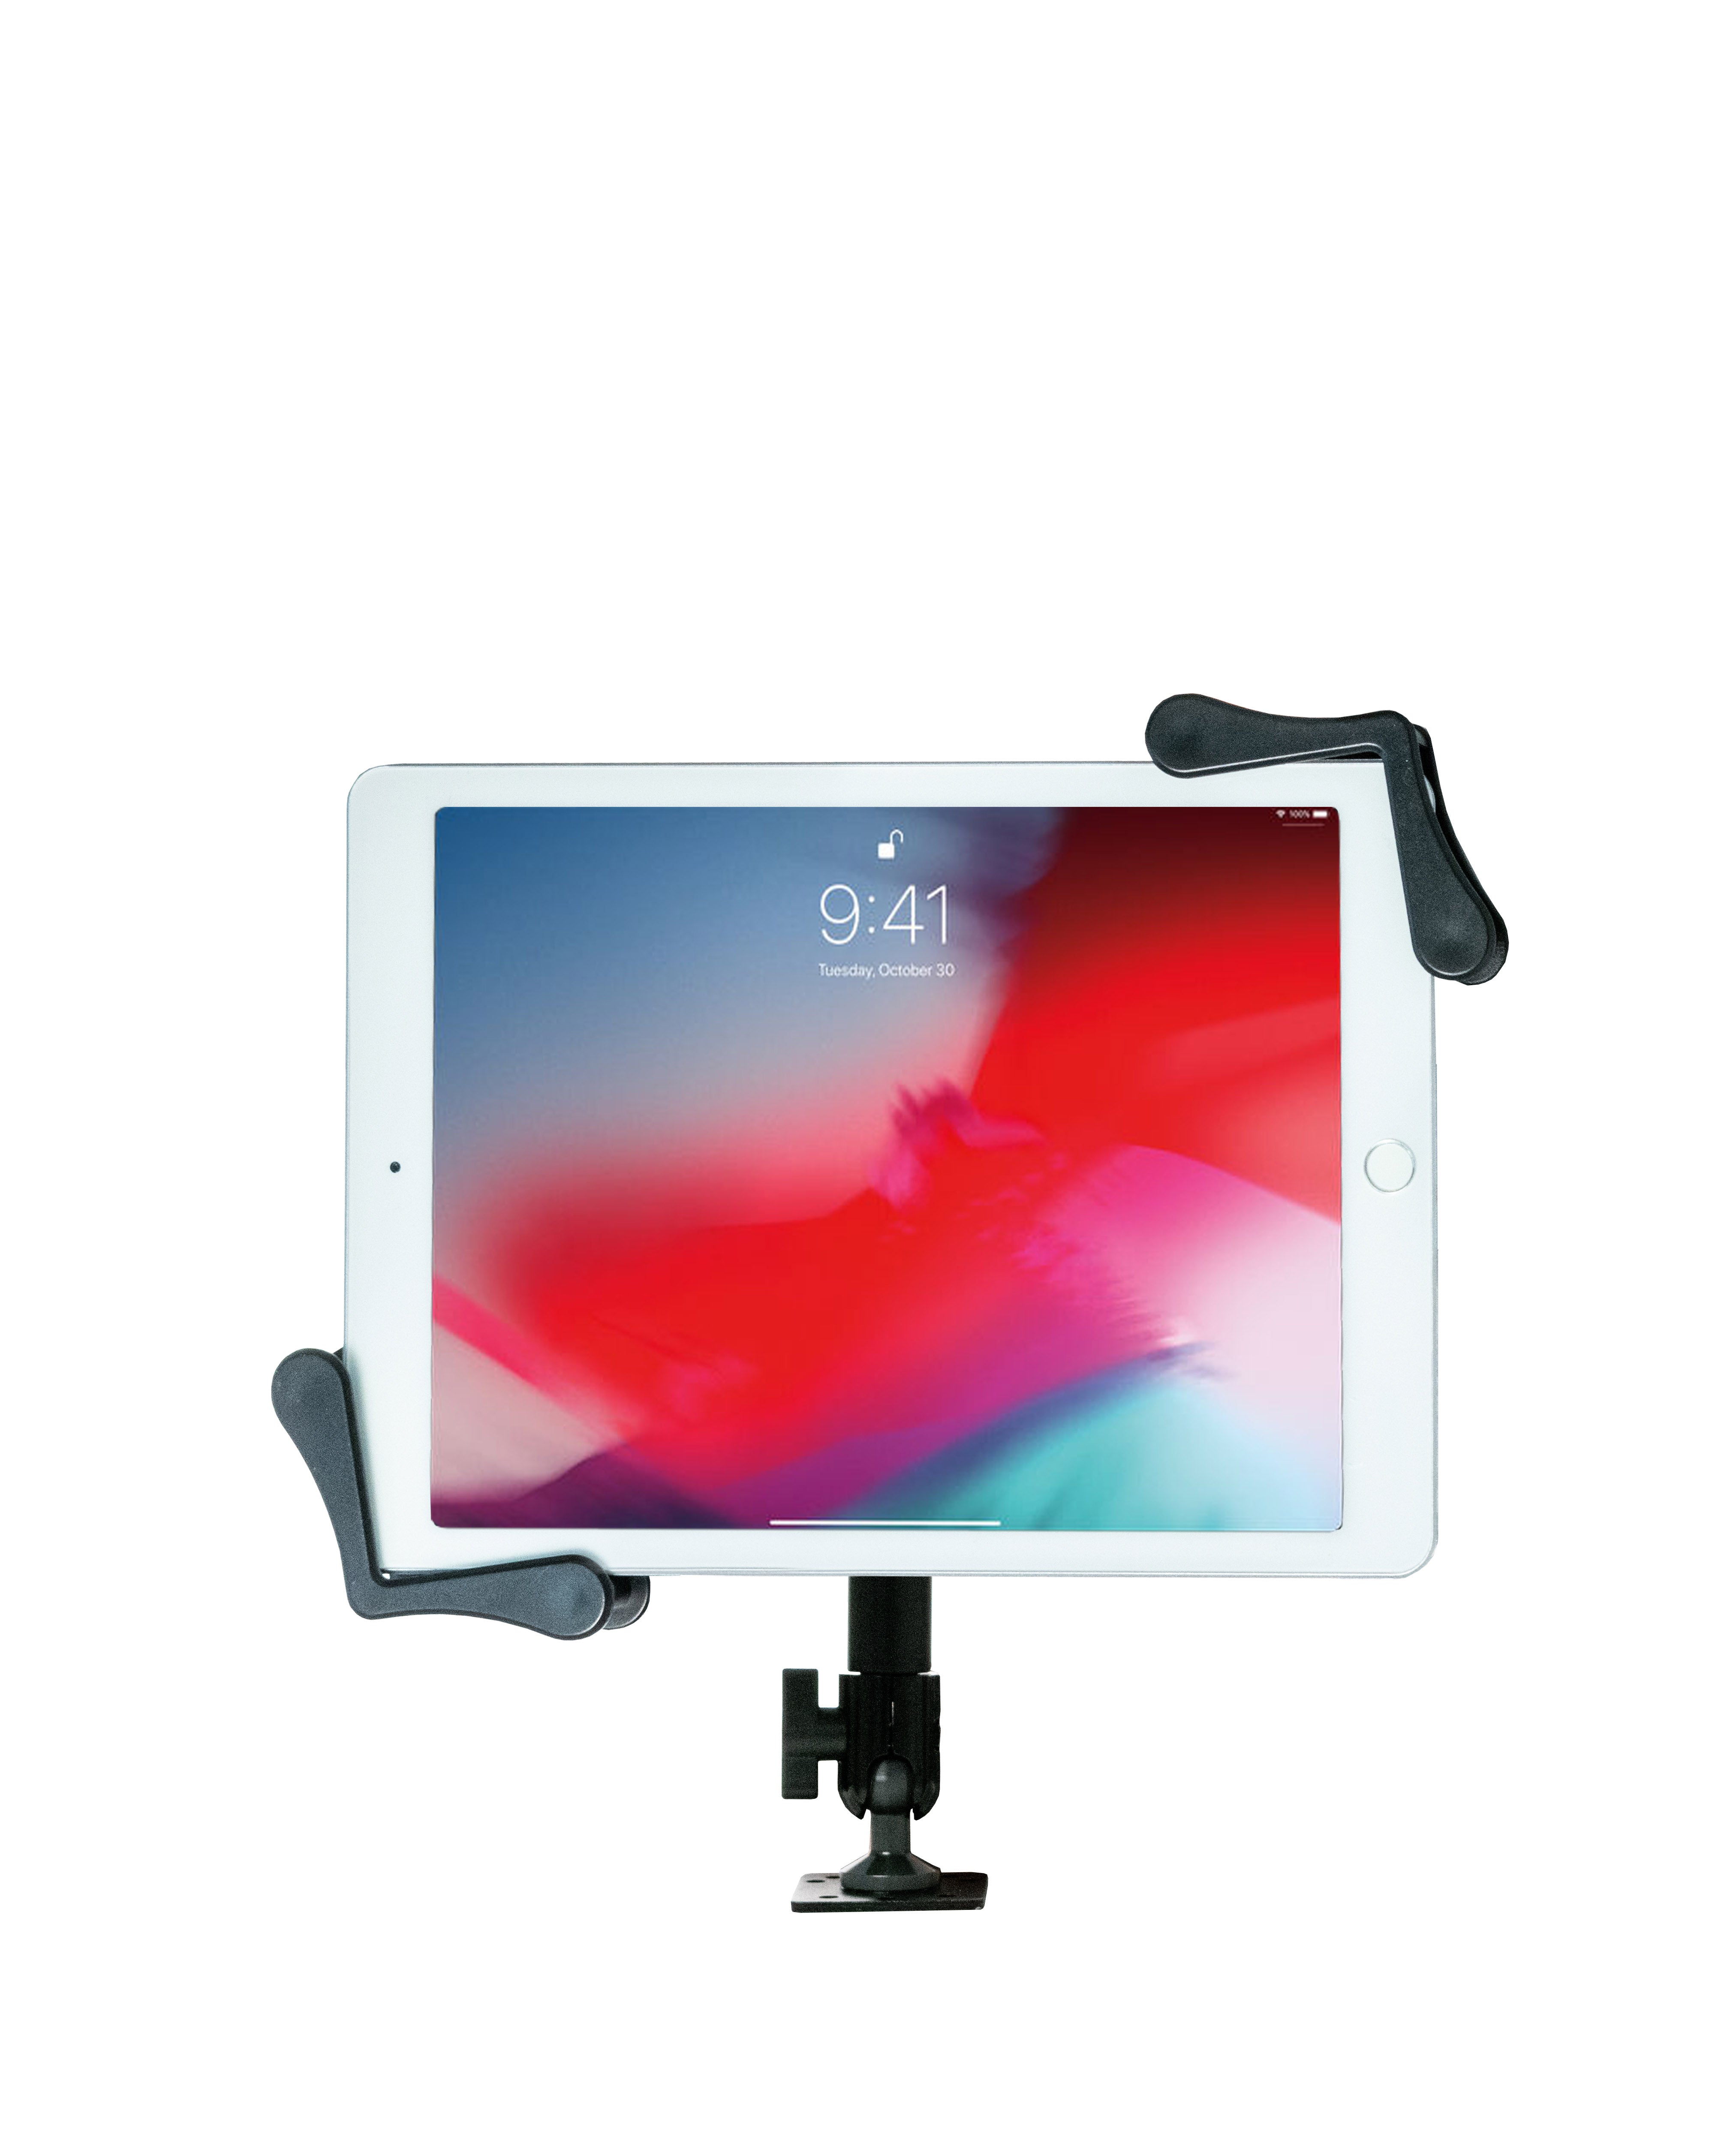 Vehicle Dashboard Mount for 7-14 Inch Tablets, including 13-inch iPad Air M2/ Pro M4 (2024), iPad 10.2-inch (7th/ 8th/ 9th Generation) and more